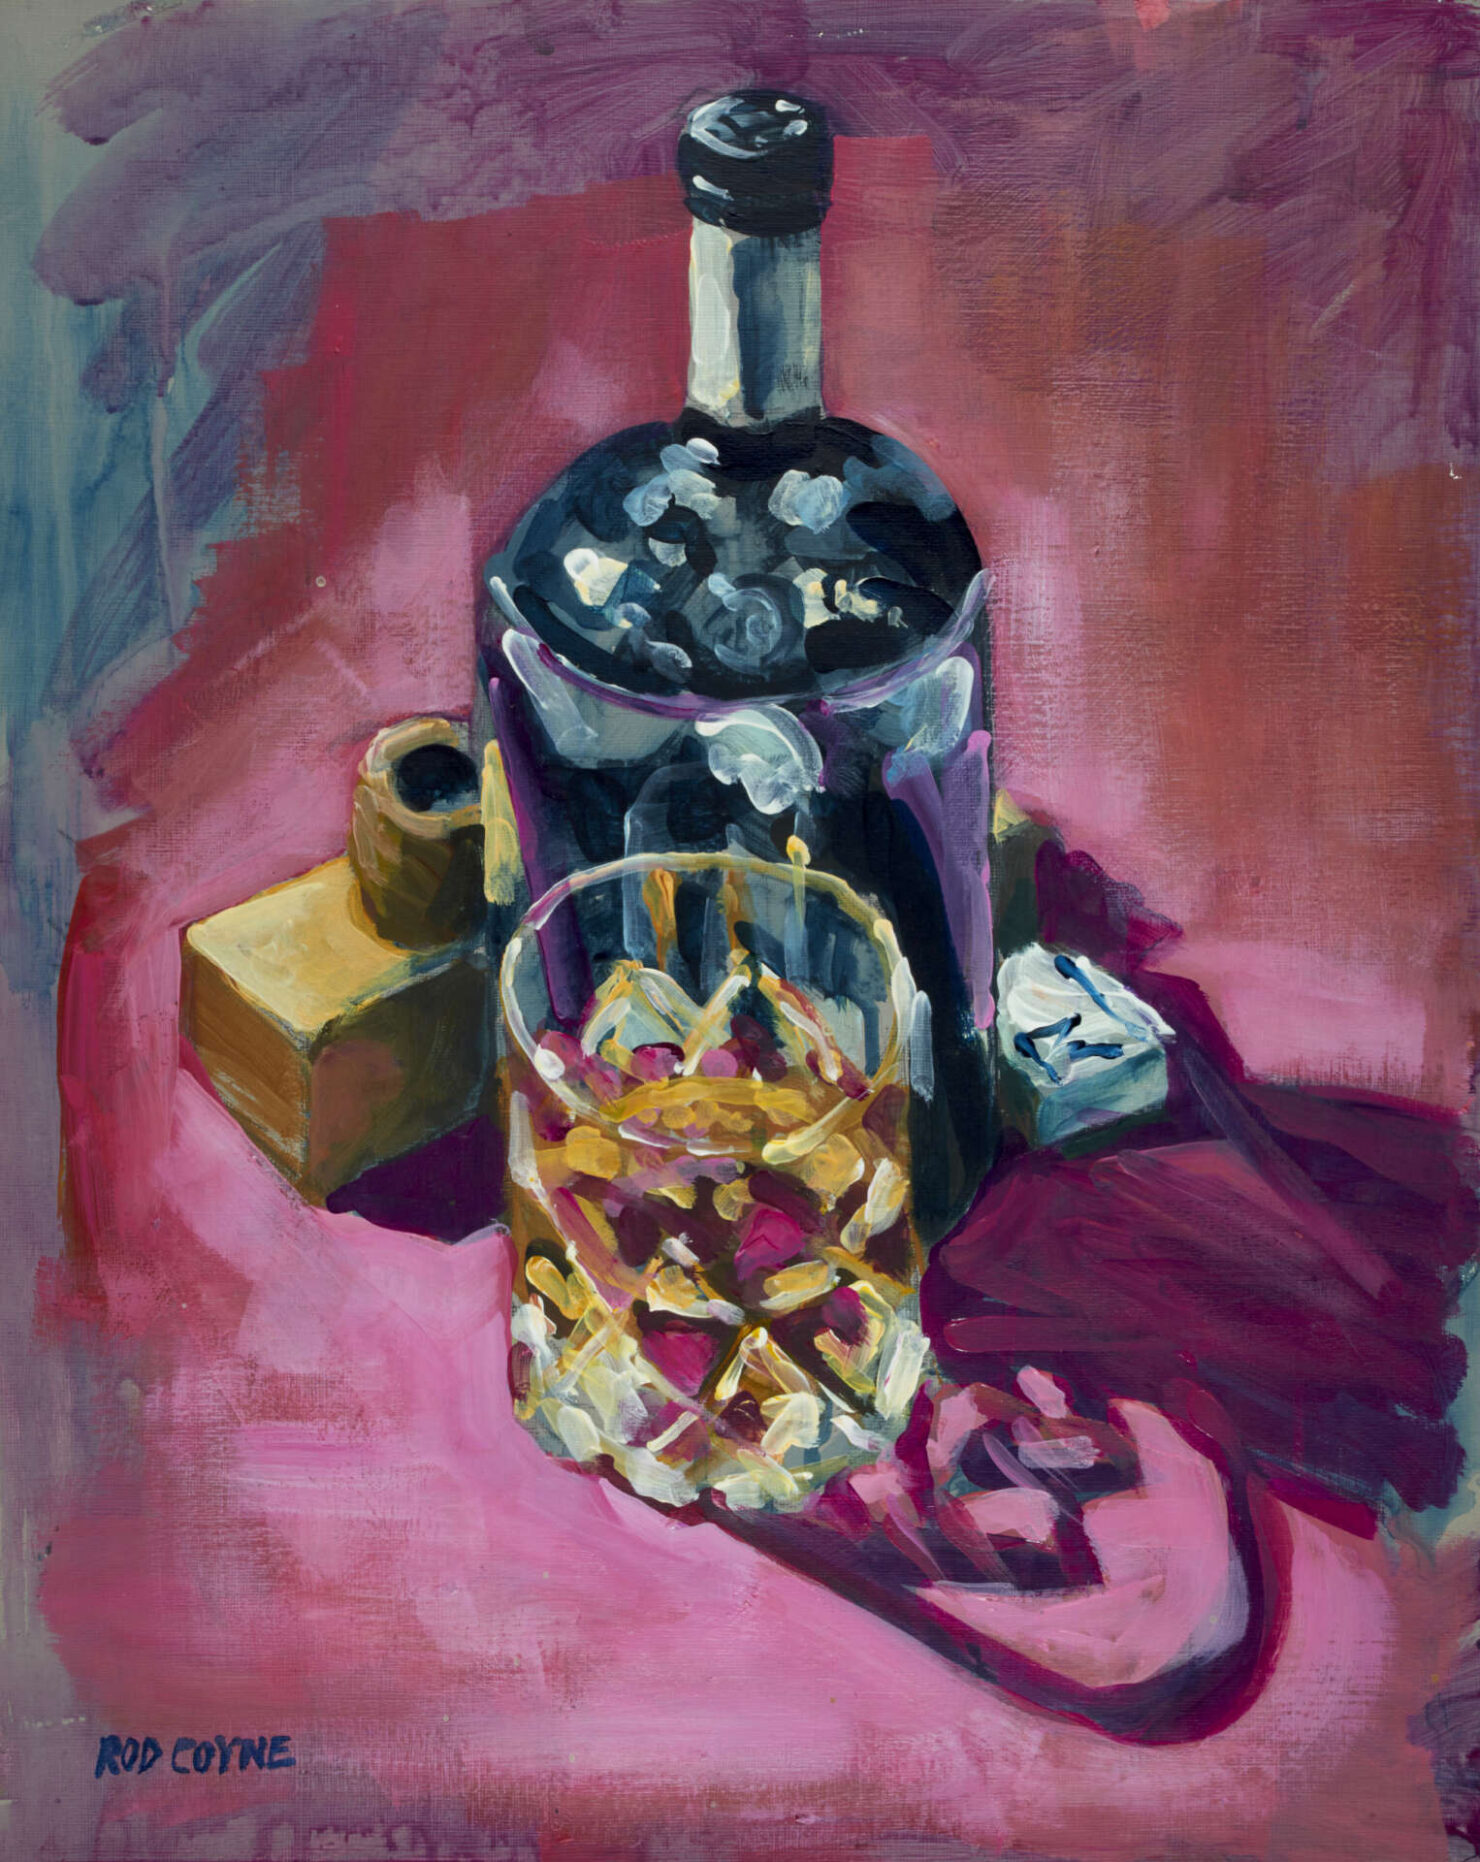 artist rod coyne's still life painting "ultimate fathers day" is shown here.